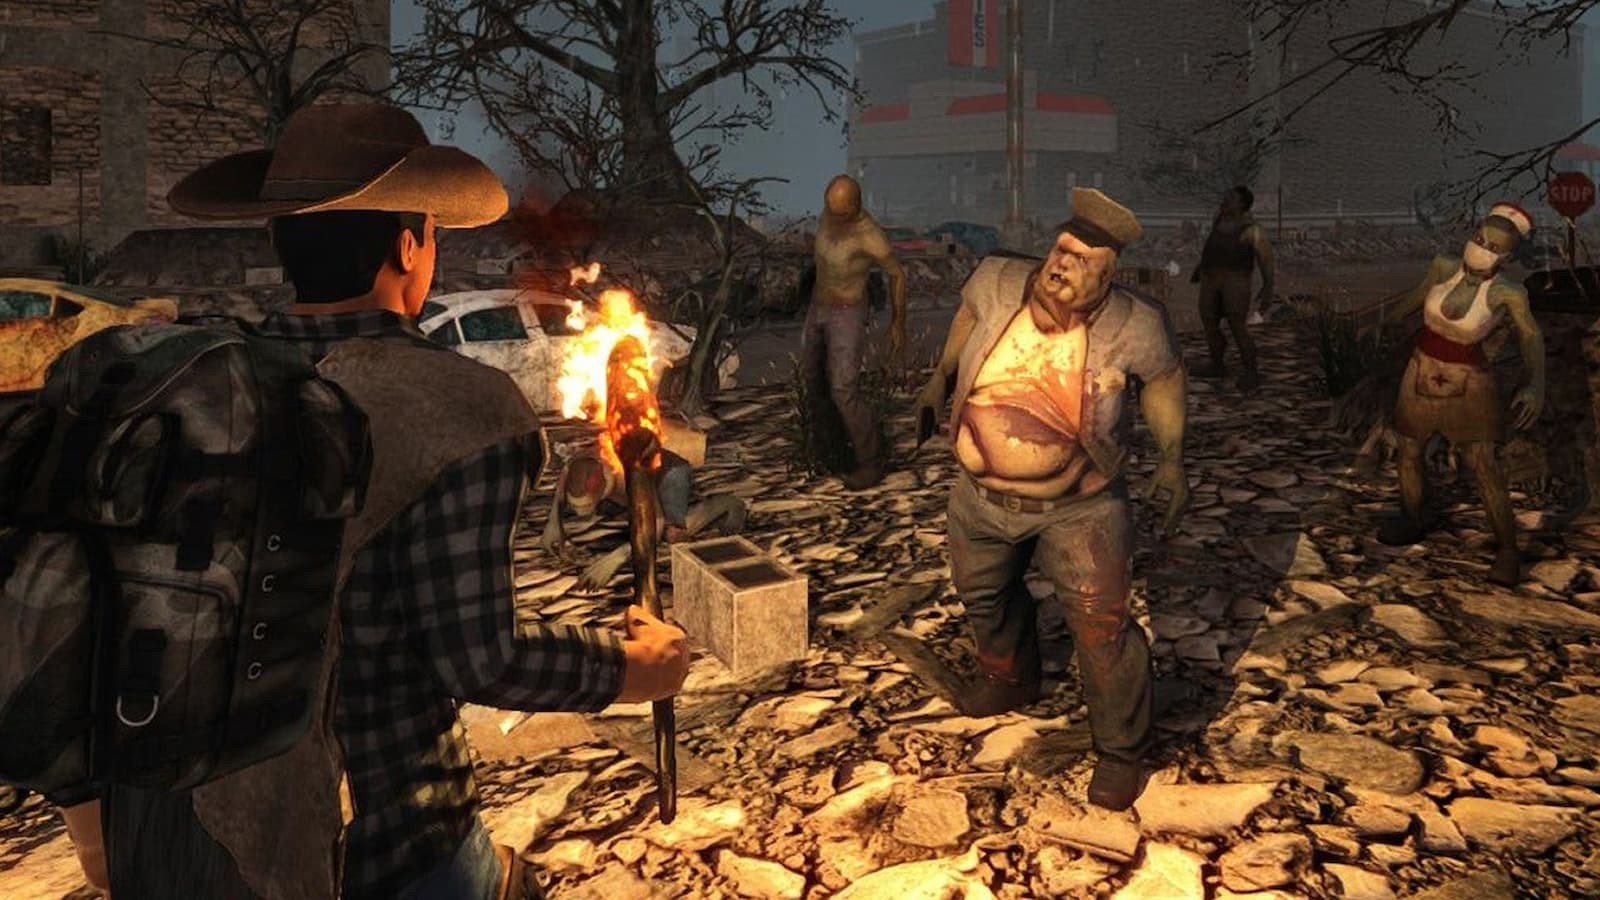 Players encounter Zombie Bear in 7 Days to Die. Image via The Fun Pimps